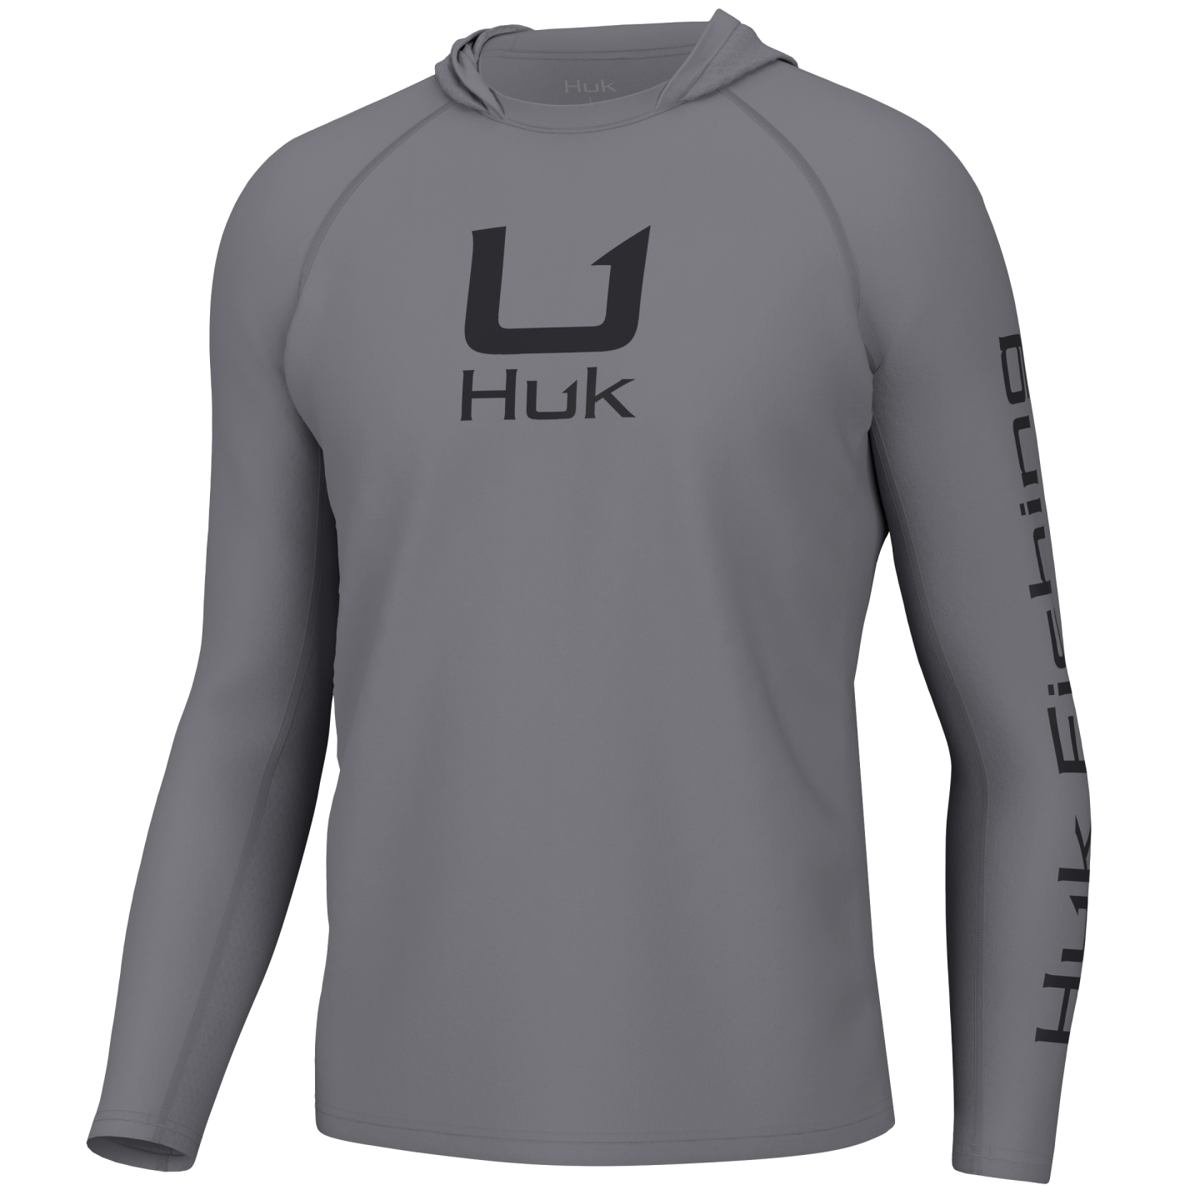 All-Weather Fishing Apparel from Huk – Huk Gear